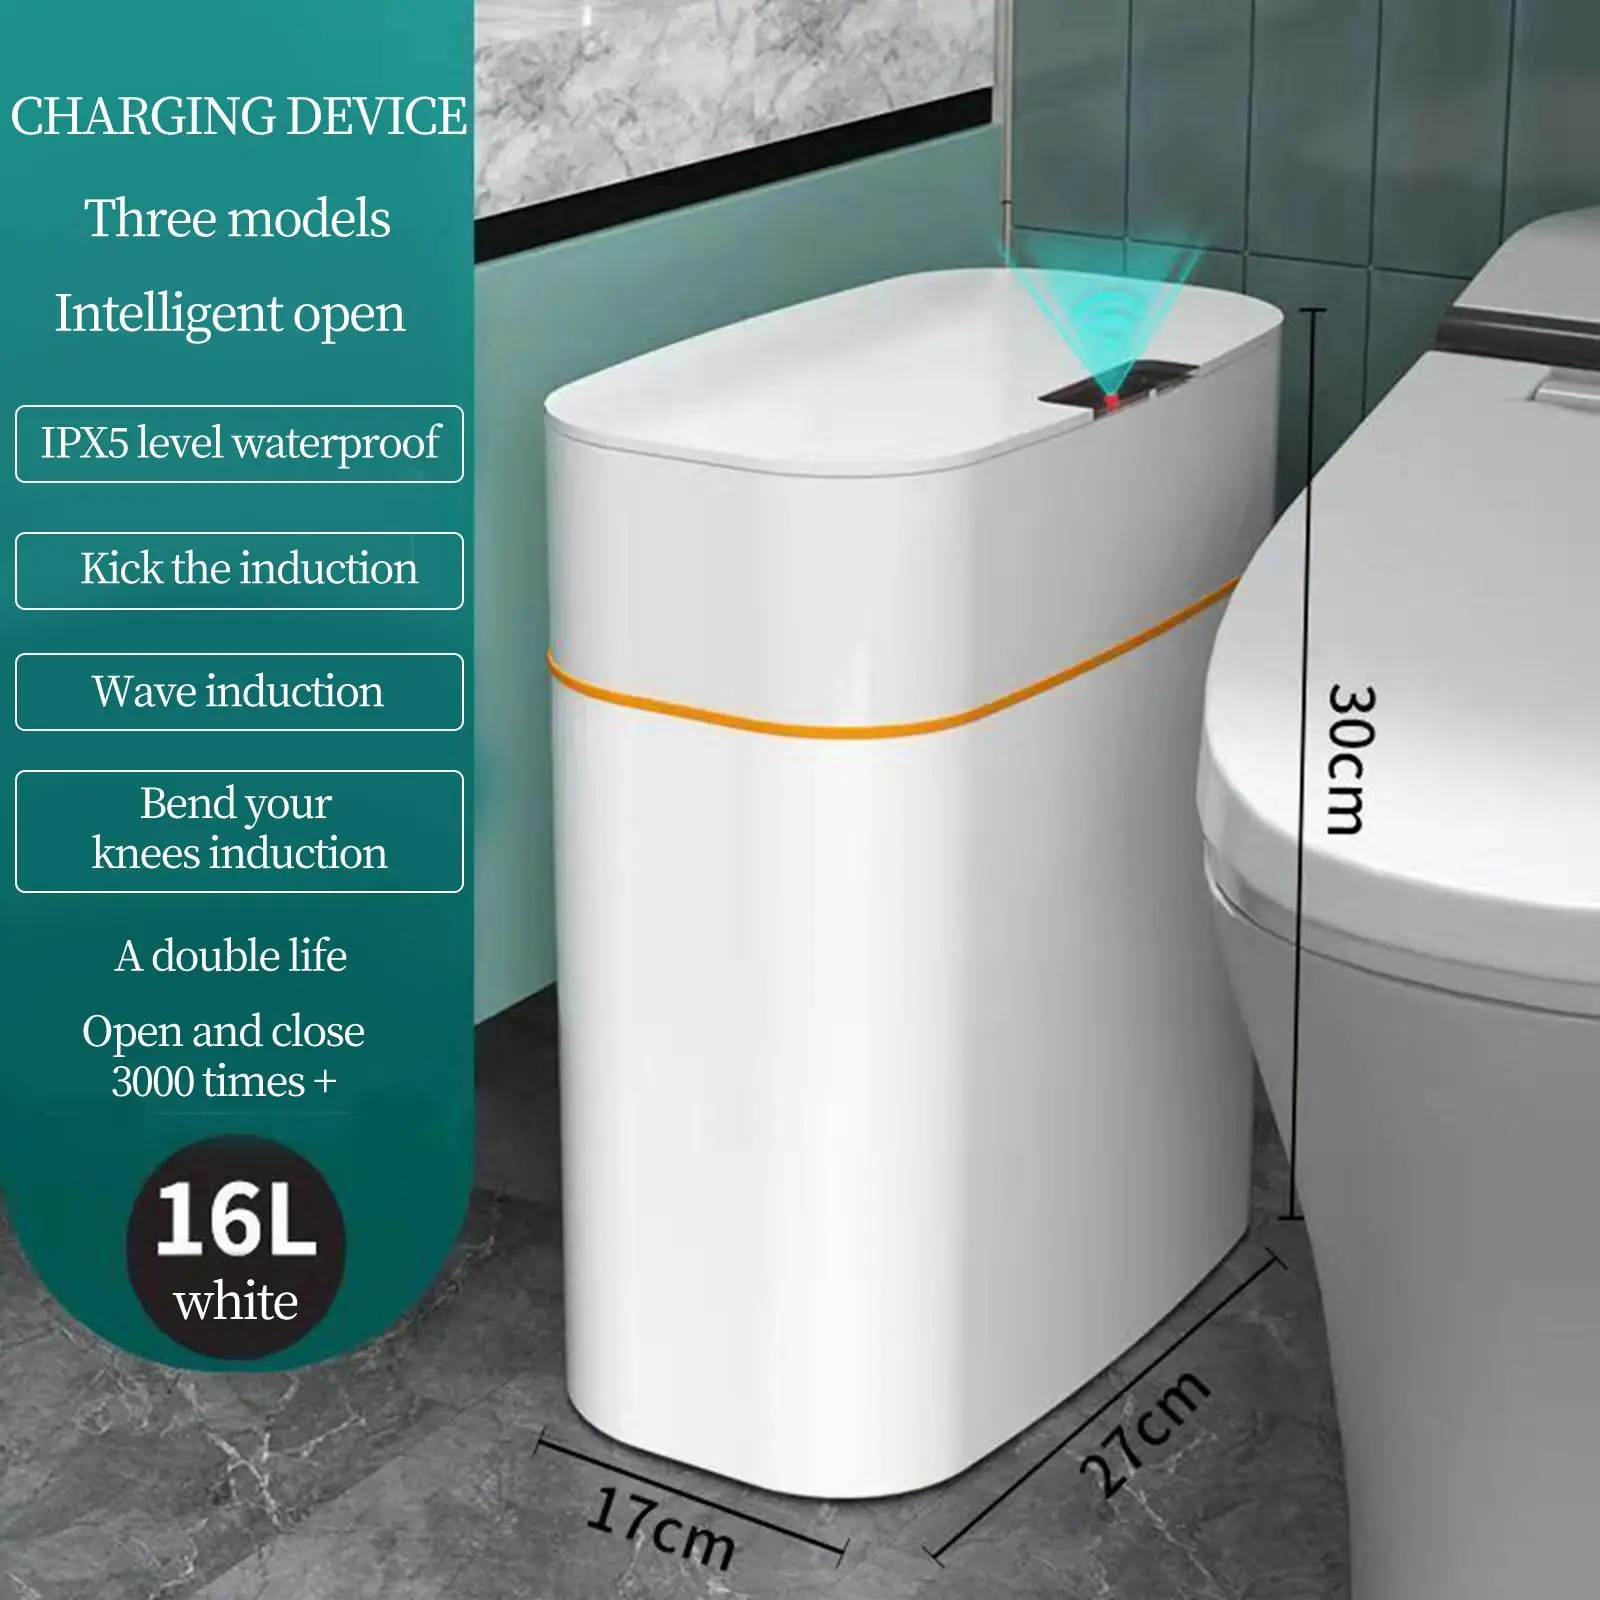 Automatic Motion Sensor Trash Can Touchless Waterproof for Bedroom Bathroom